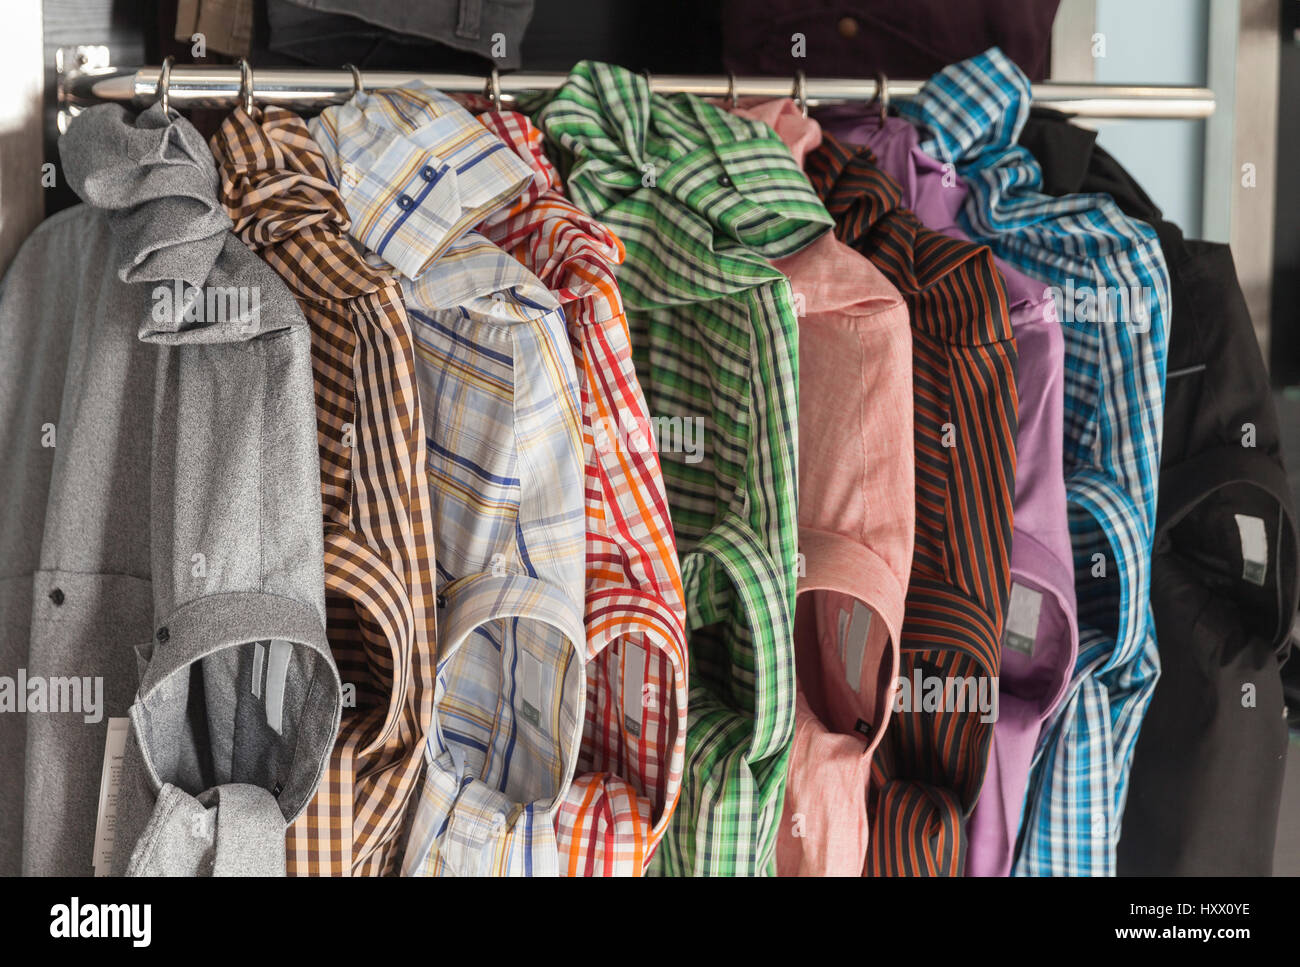 several models of men 's shirts on a shelf Stock Photo